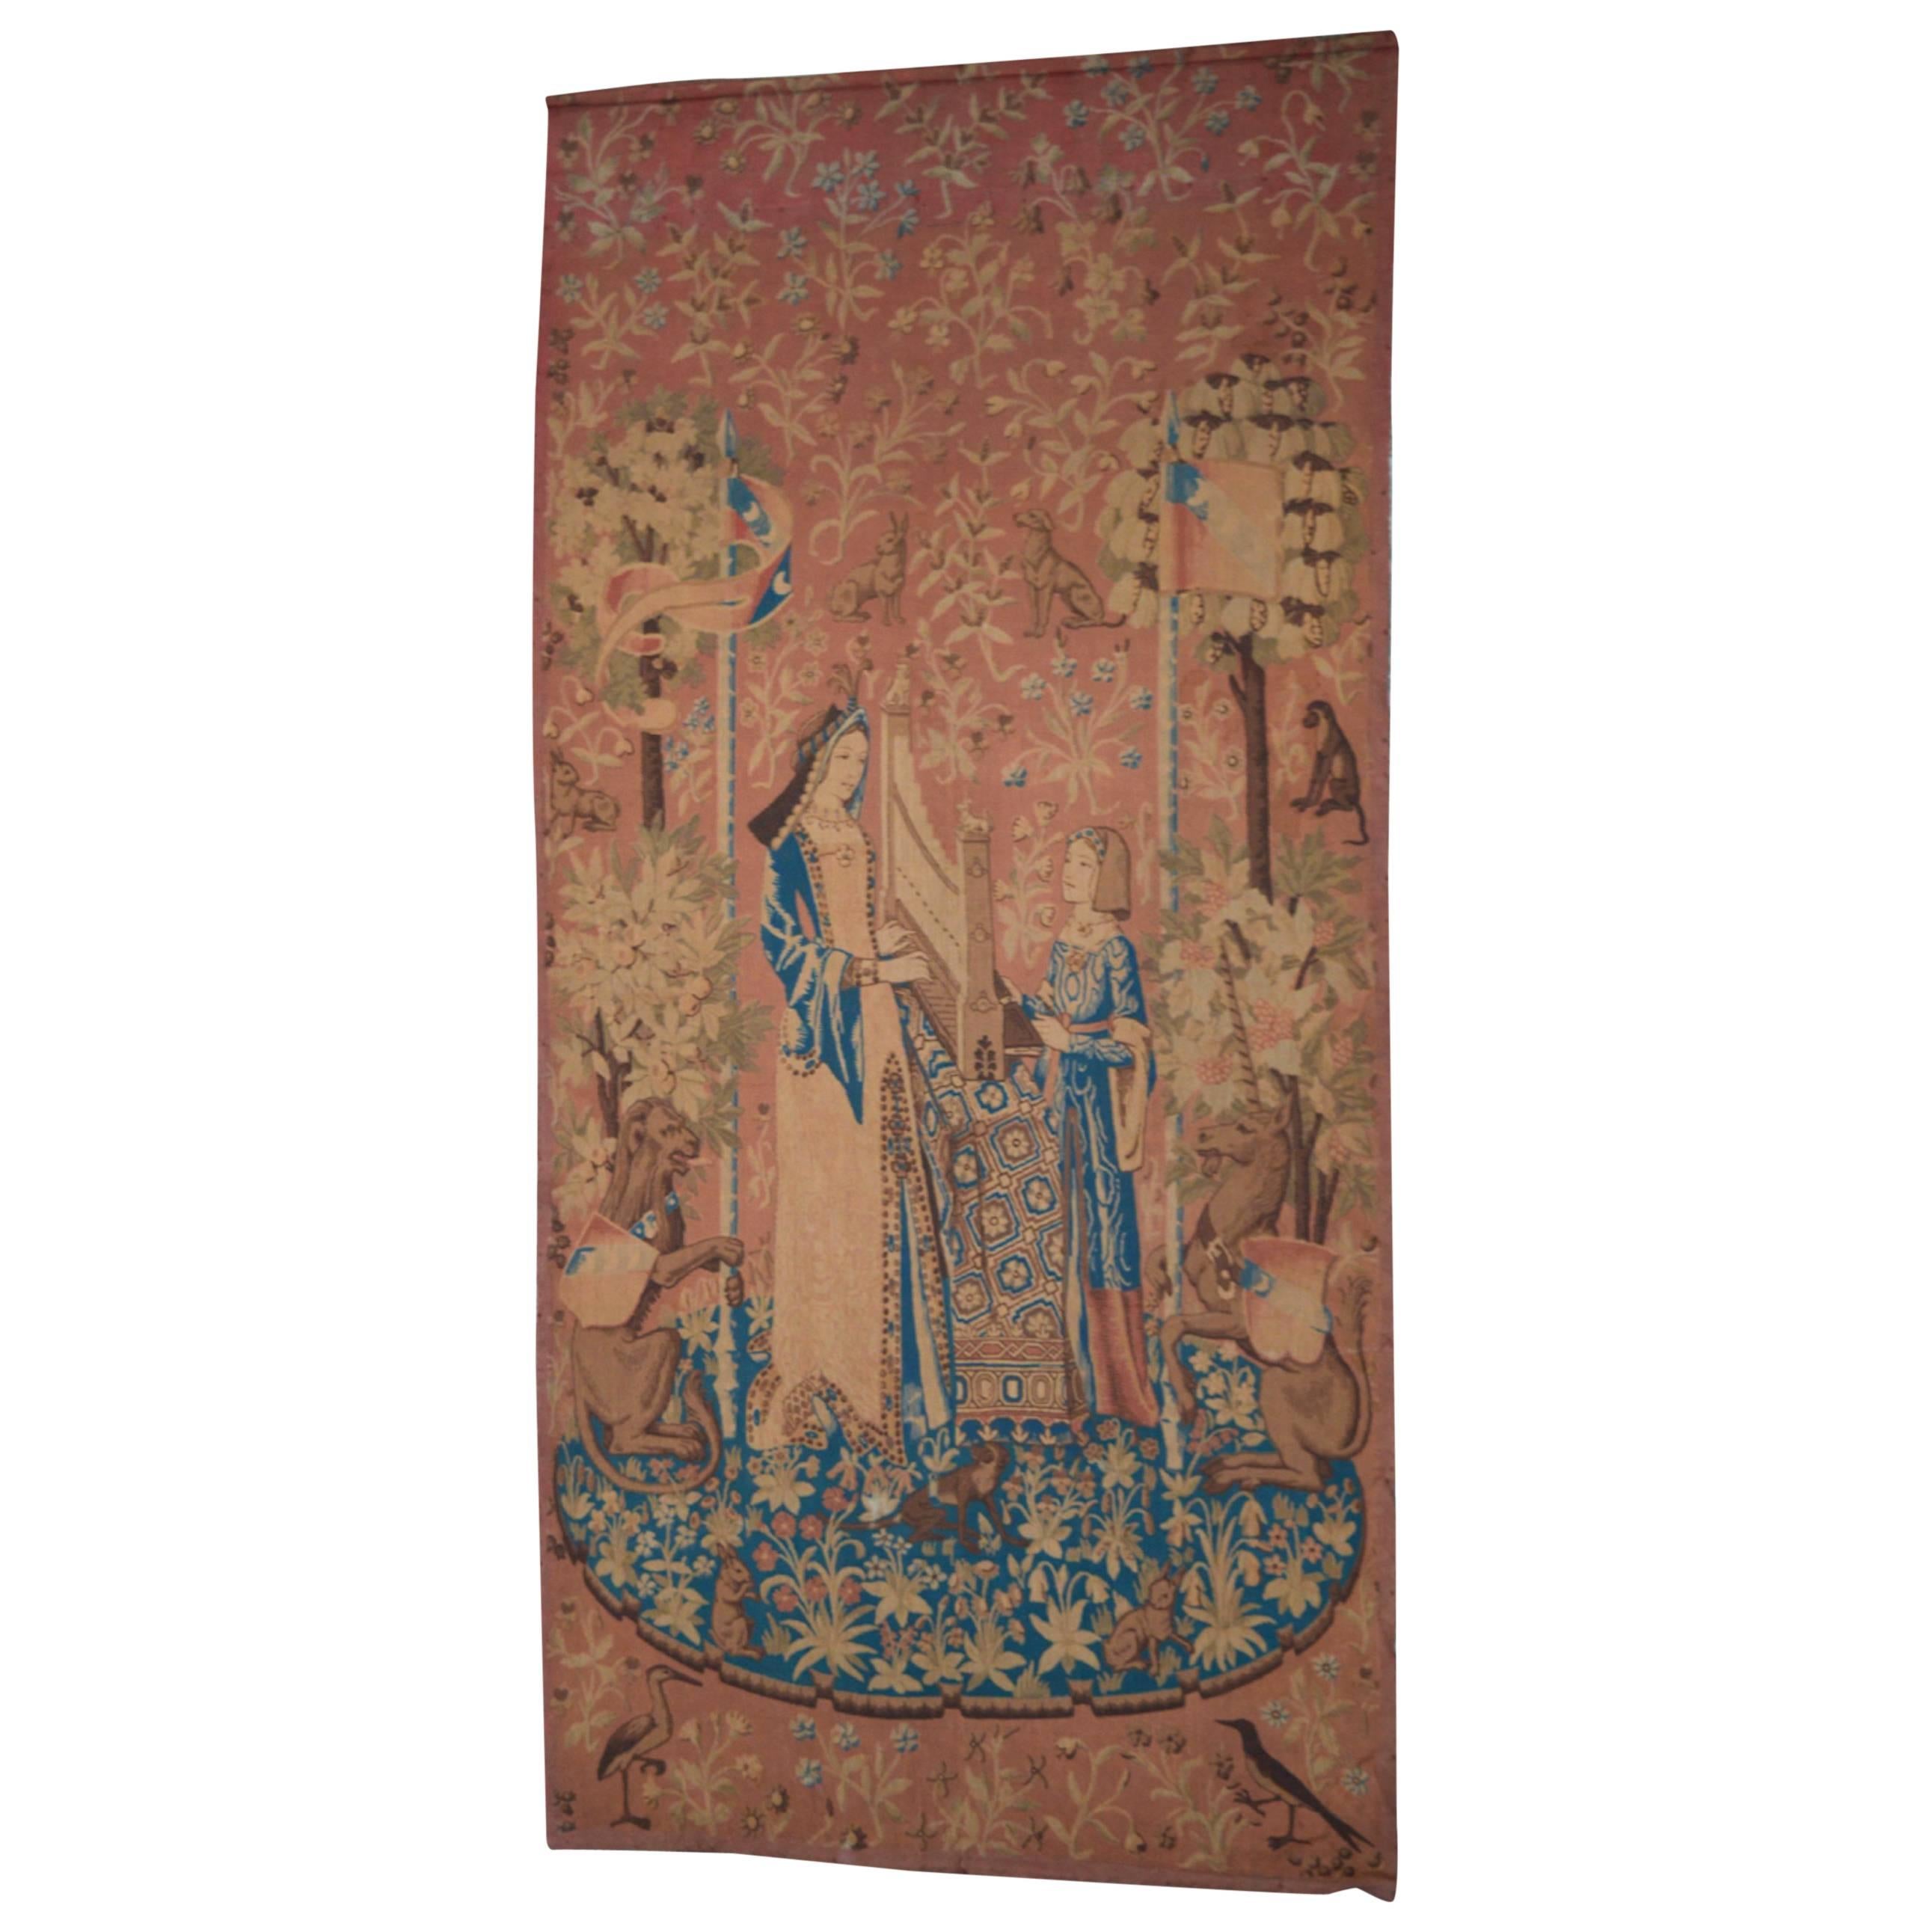 Large Medieval Style Belgian Wall Hanging Tapestry "The Lady and the Unicorn"